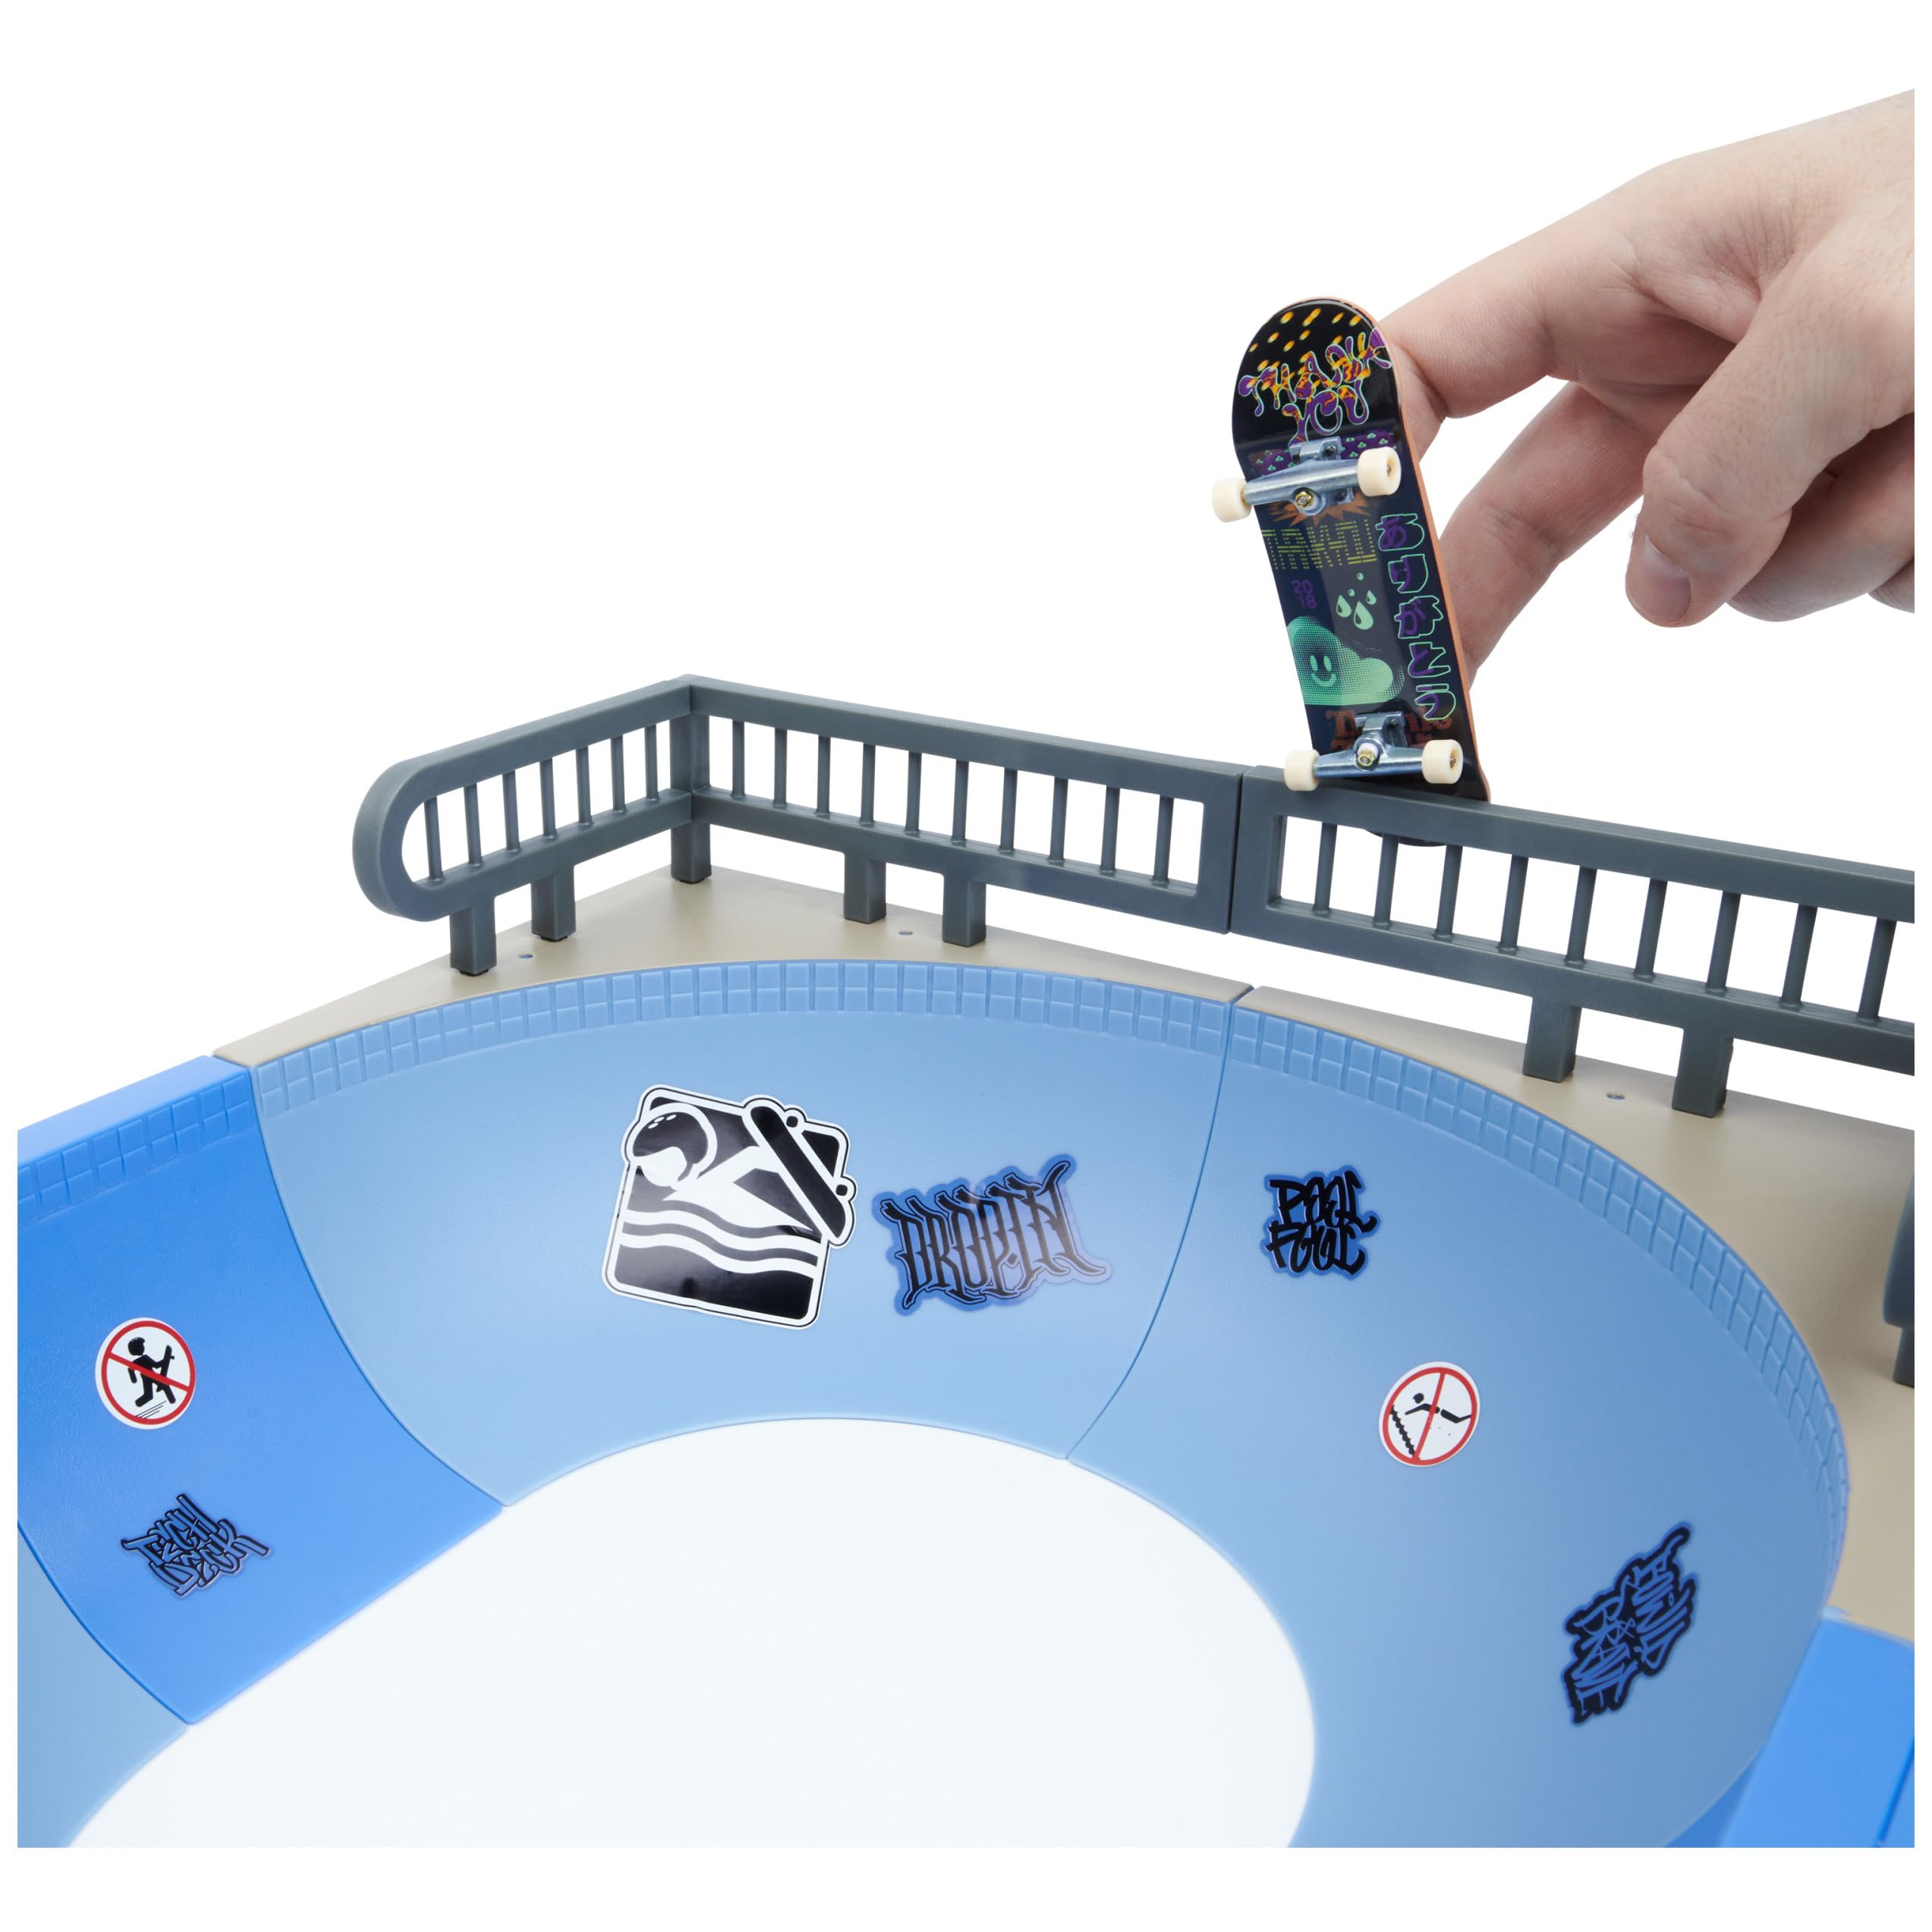 TECH DECK, Daewon Mega Bowl, X-Connect Park Creator, Customizable and Buildable Ramp Set with Exclusive Fingerboard, Kids Toy for Ages 6 and up